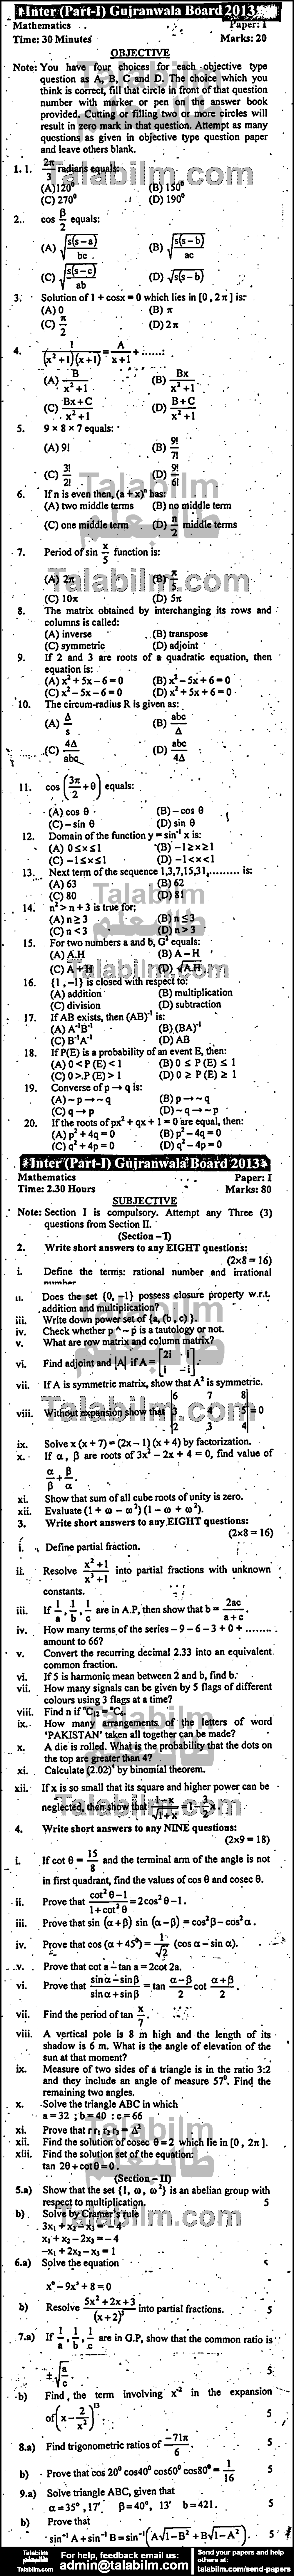 Math 0 past paper for Group-I 2013